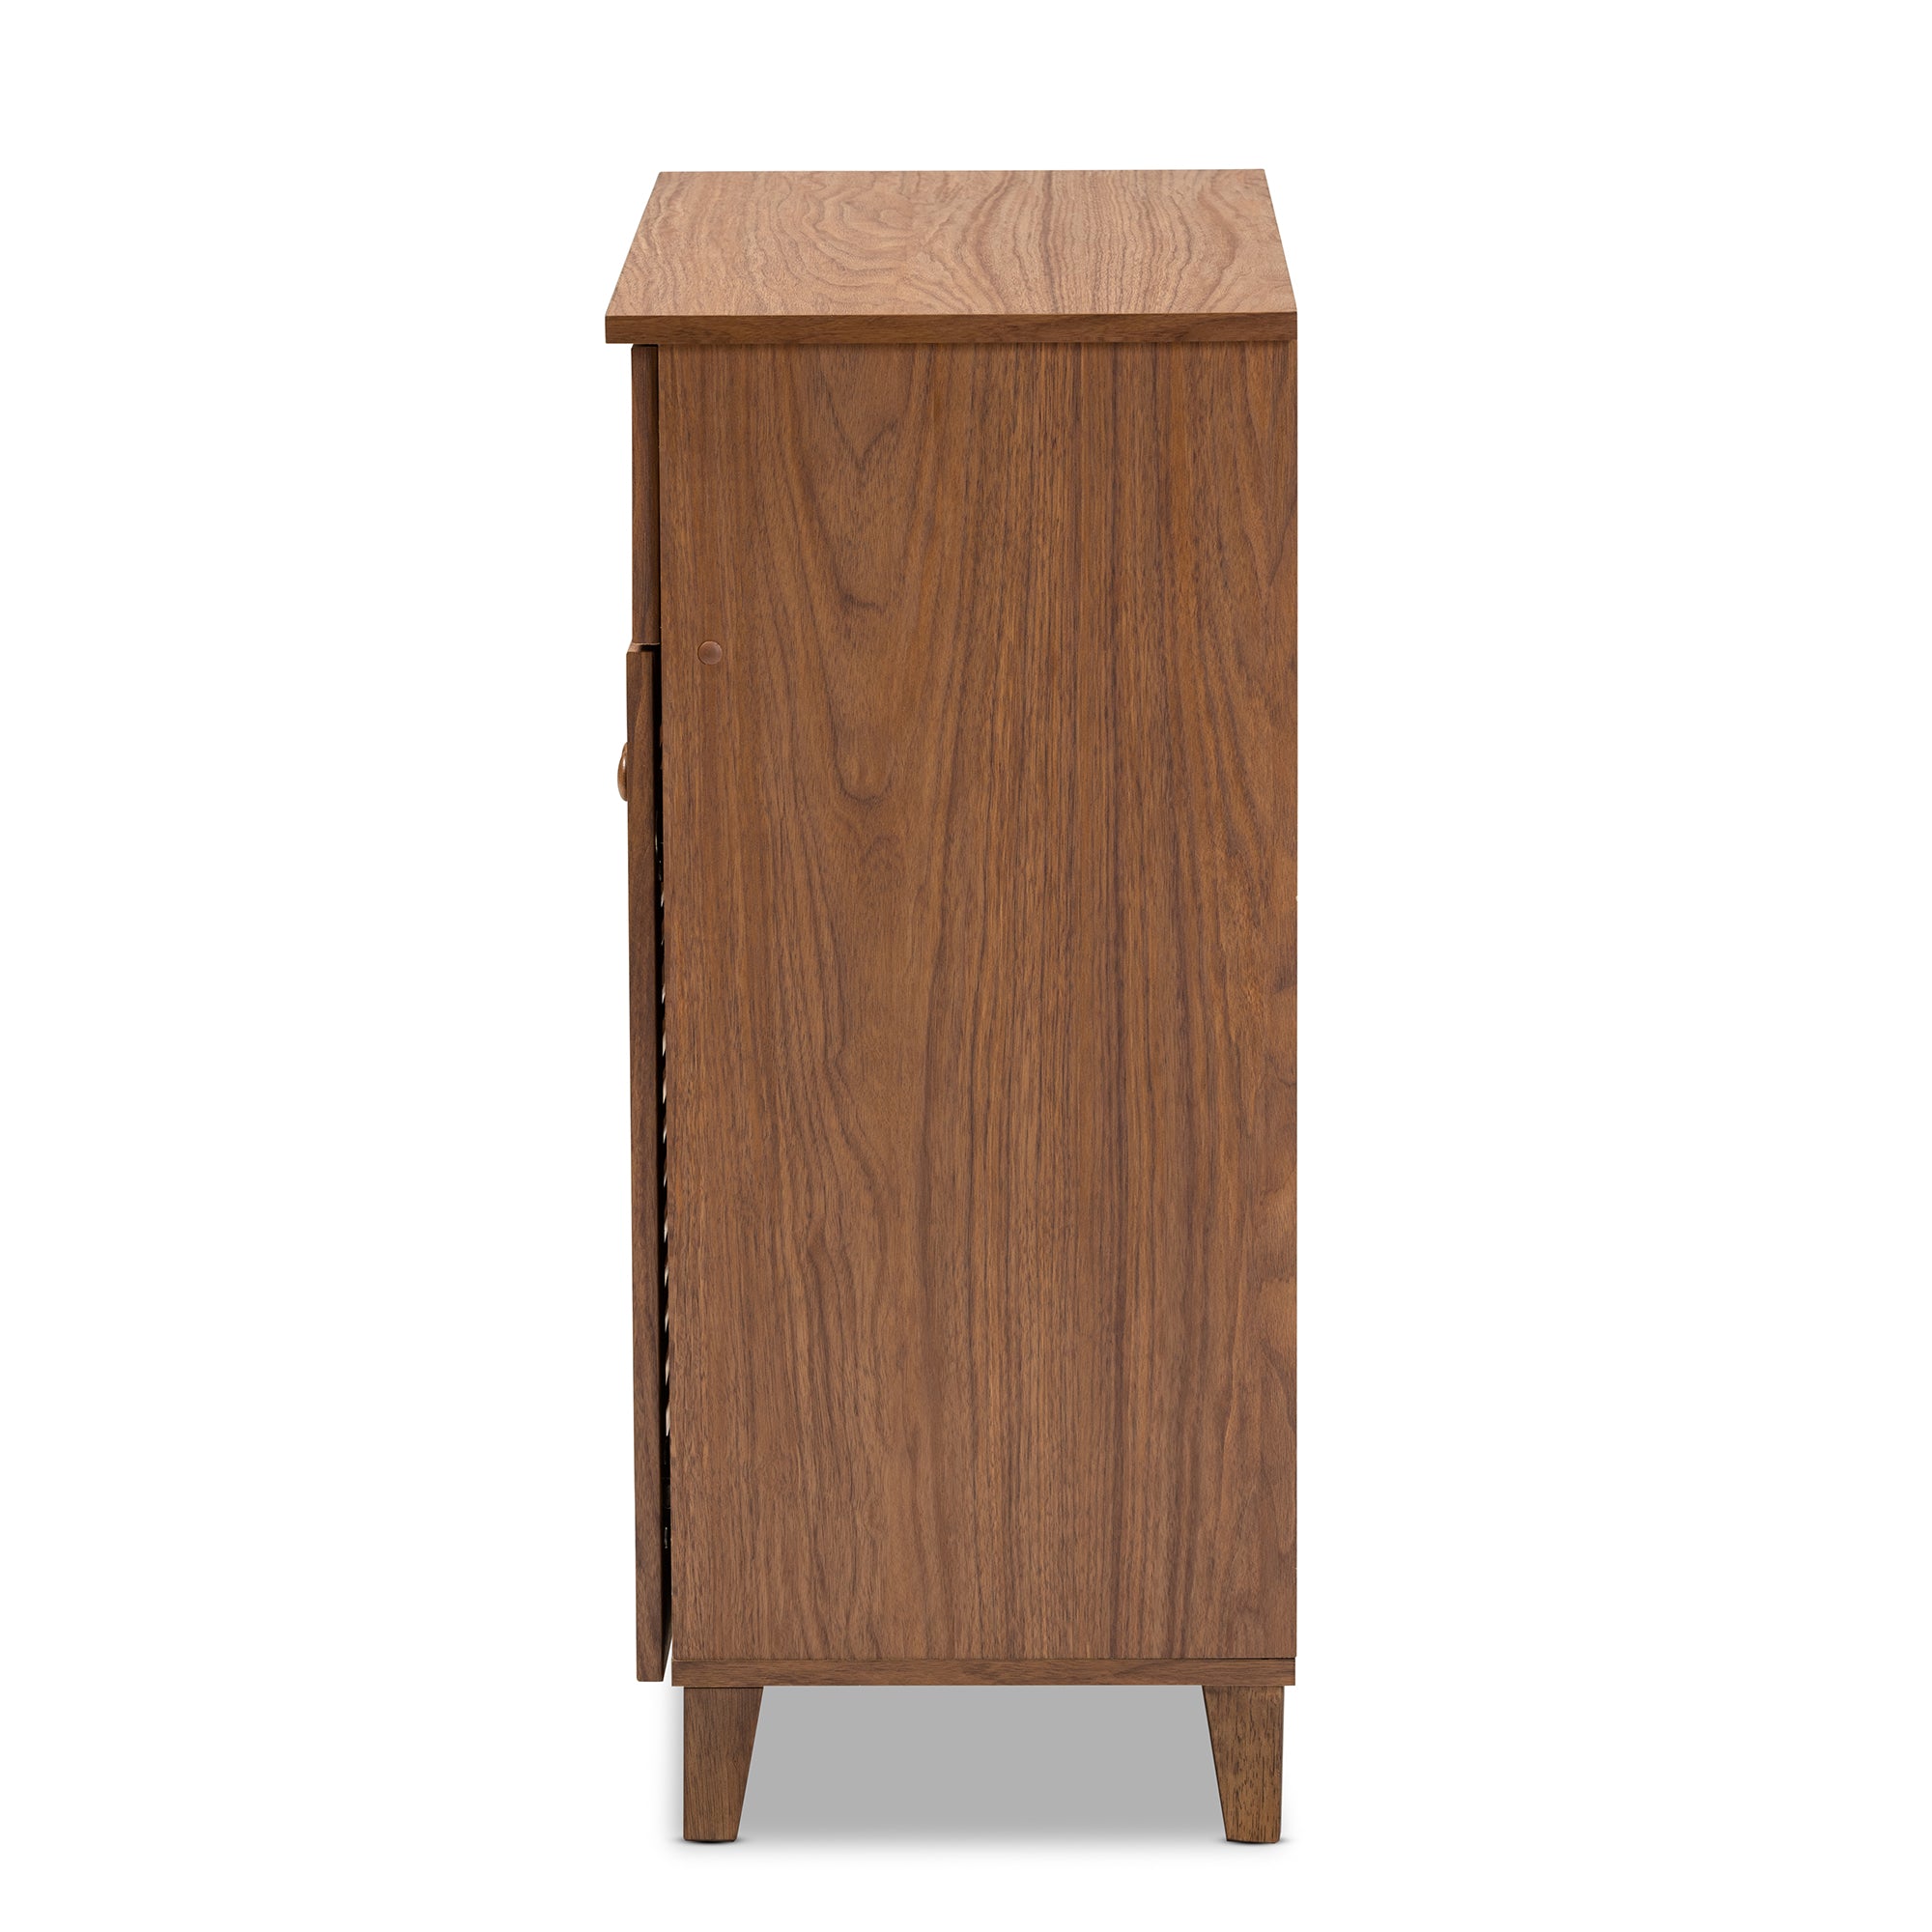 Coolidge Contemporary Shoe Cabinet 4-Shelf with Drawer-Shoe Cabinet-Baxton Studio - WI-Wall2Wall Furnishings